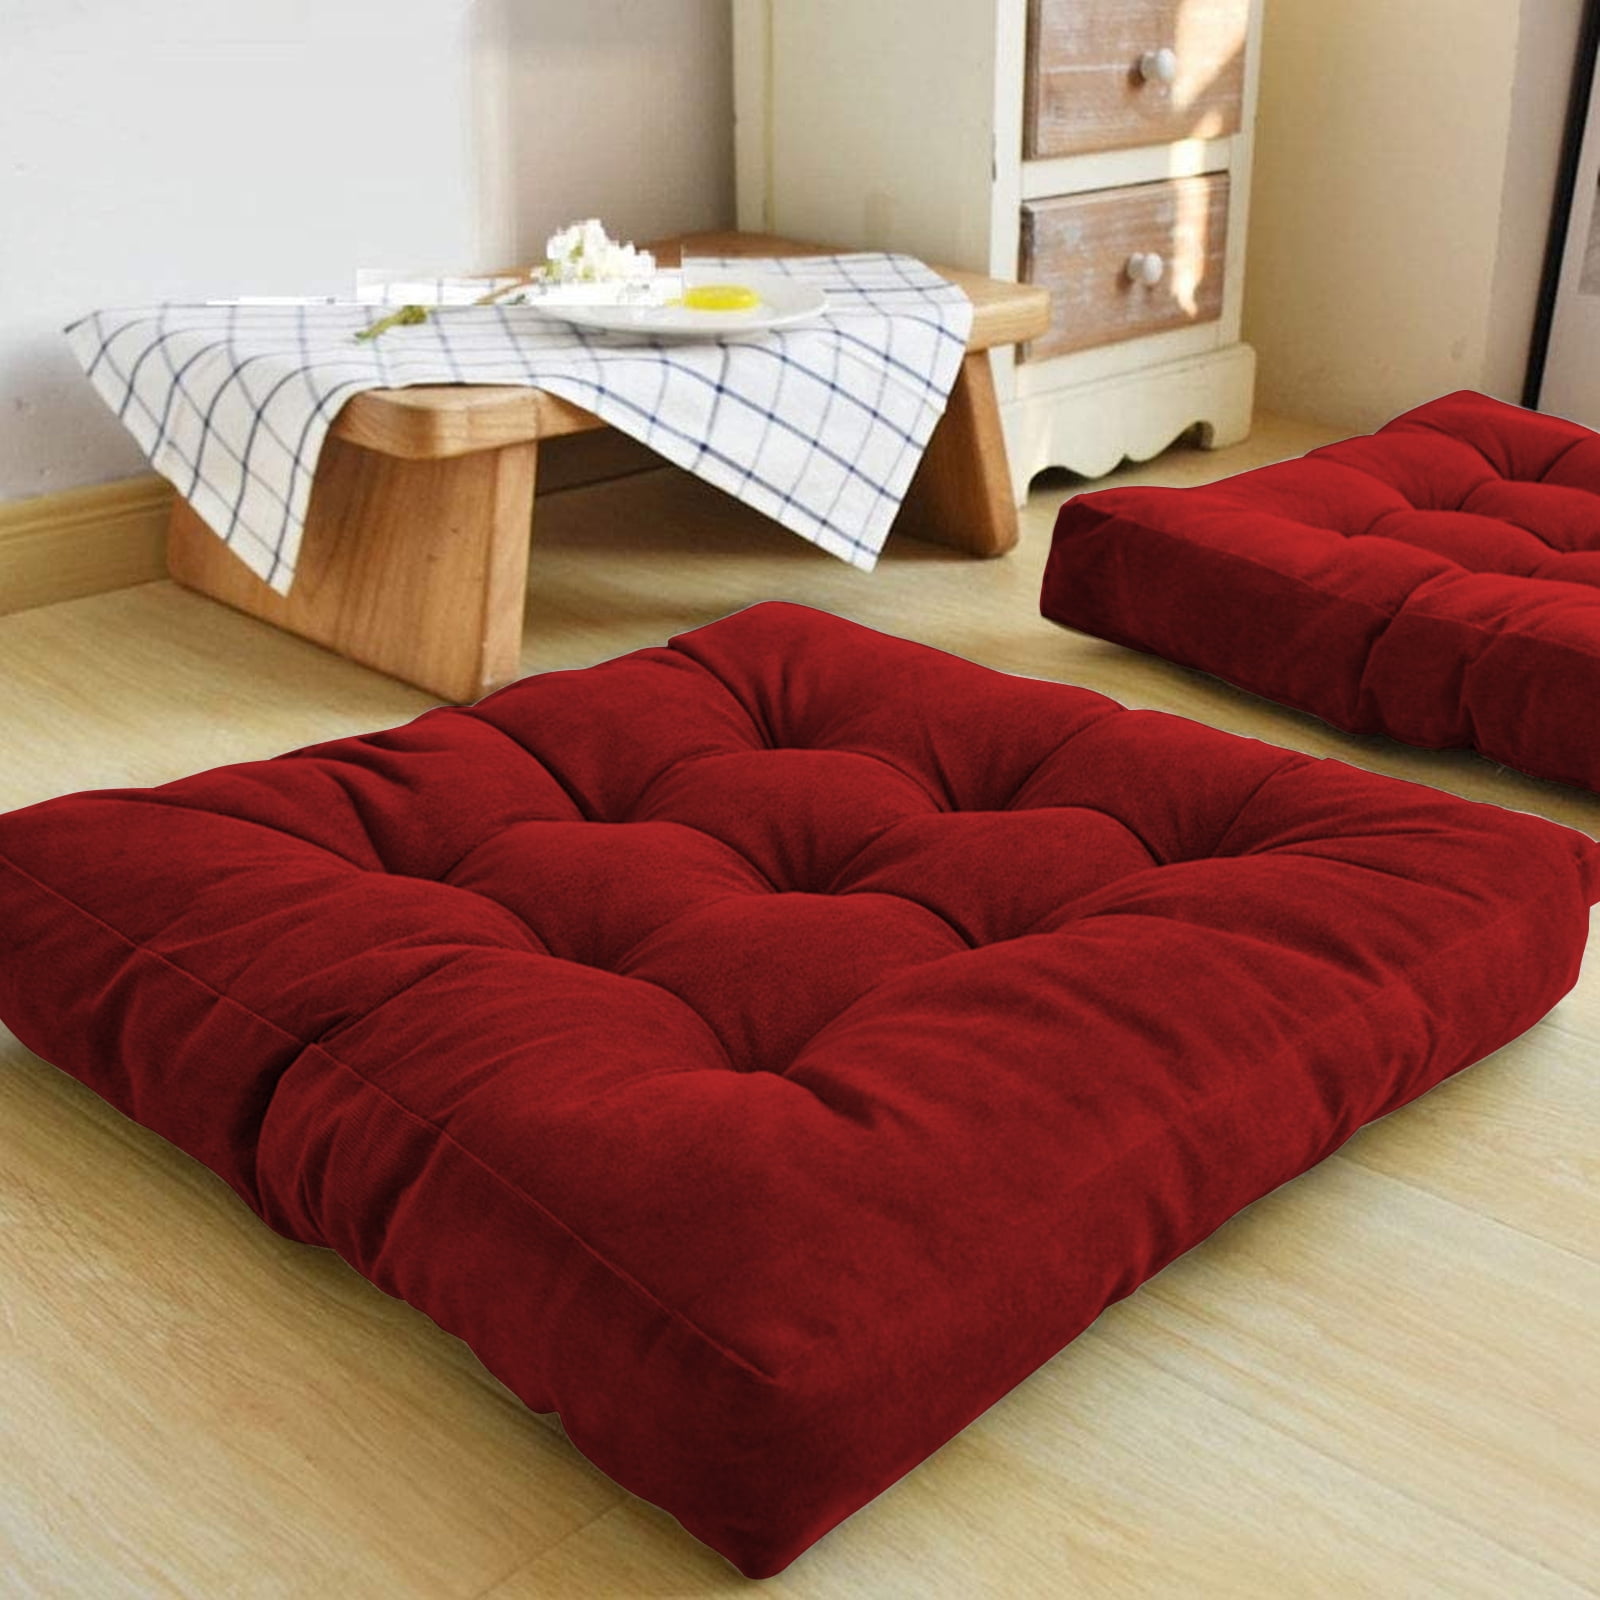 Square Thick Floor Seating Cushions,Solid Thick Tufted Cushion Meditation  Pillow for Sitting on Floor,Tatami Pad for Guests or Kids Reading,Yoga